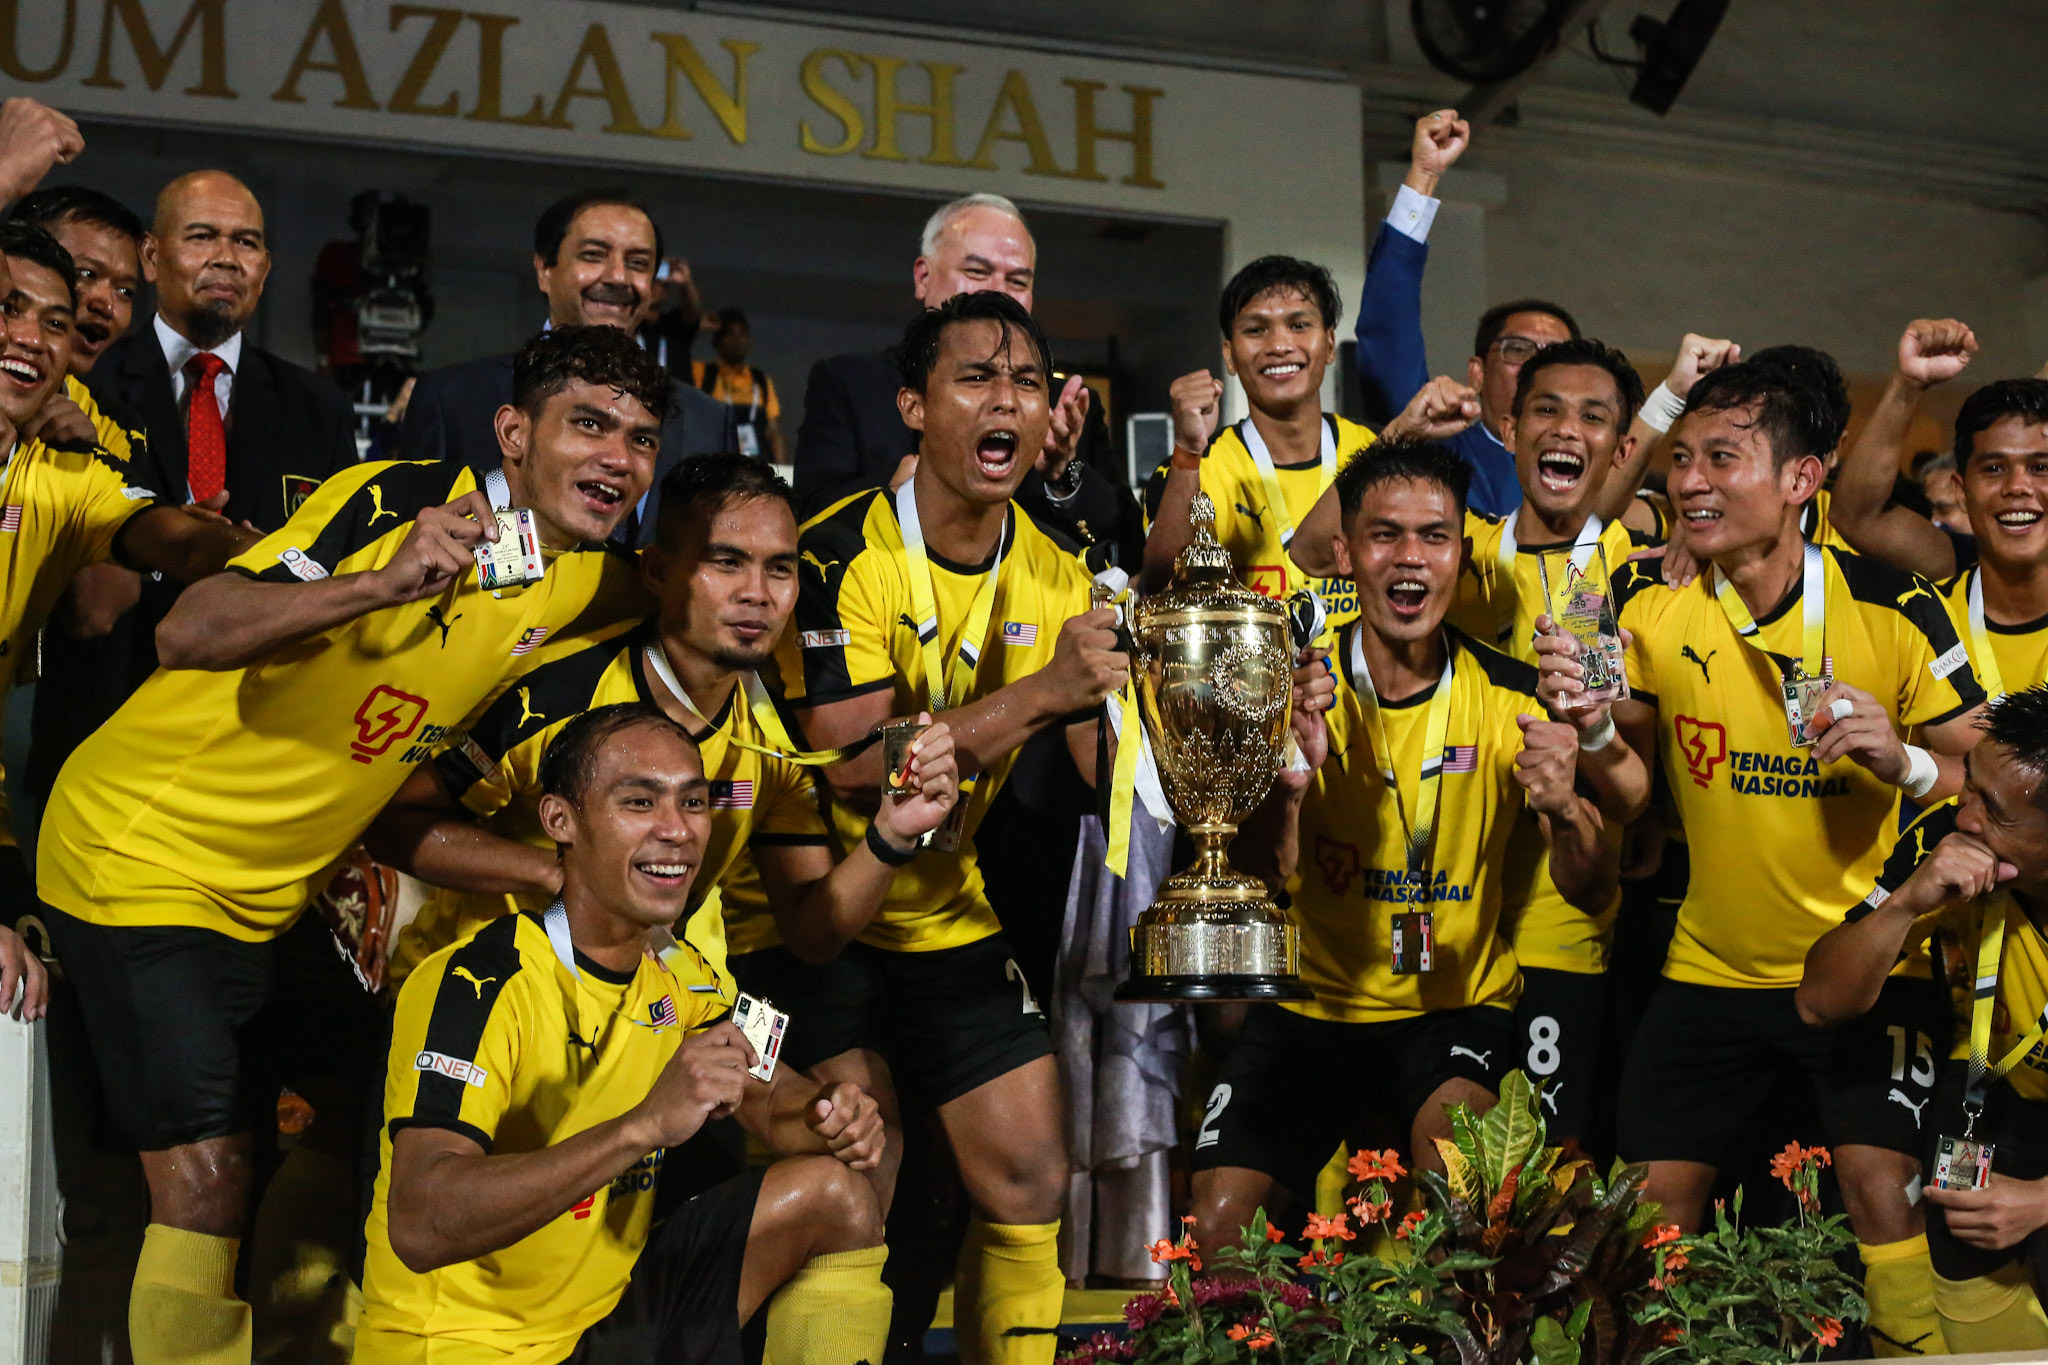 Sultan of Perak with the Malaysian team after presenting the Cup